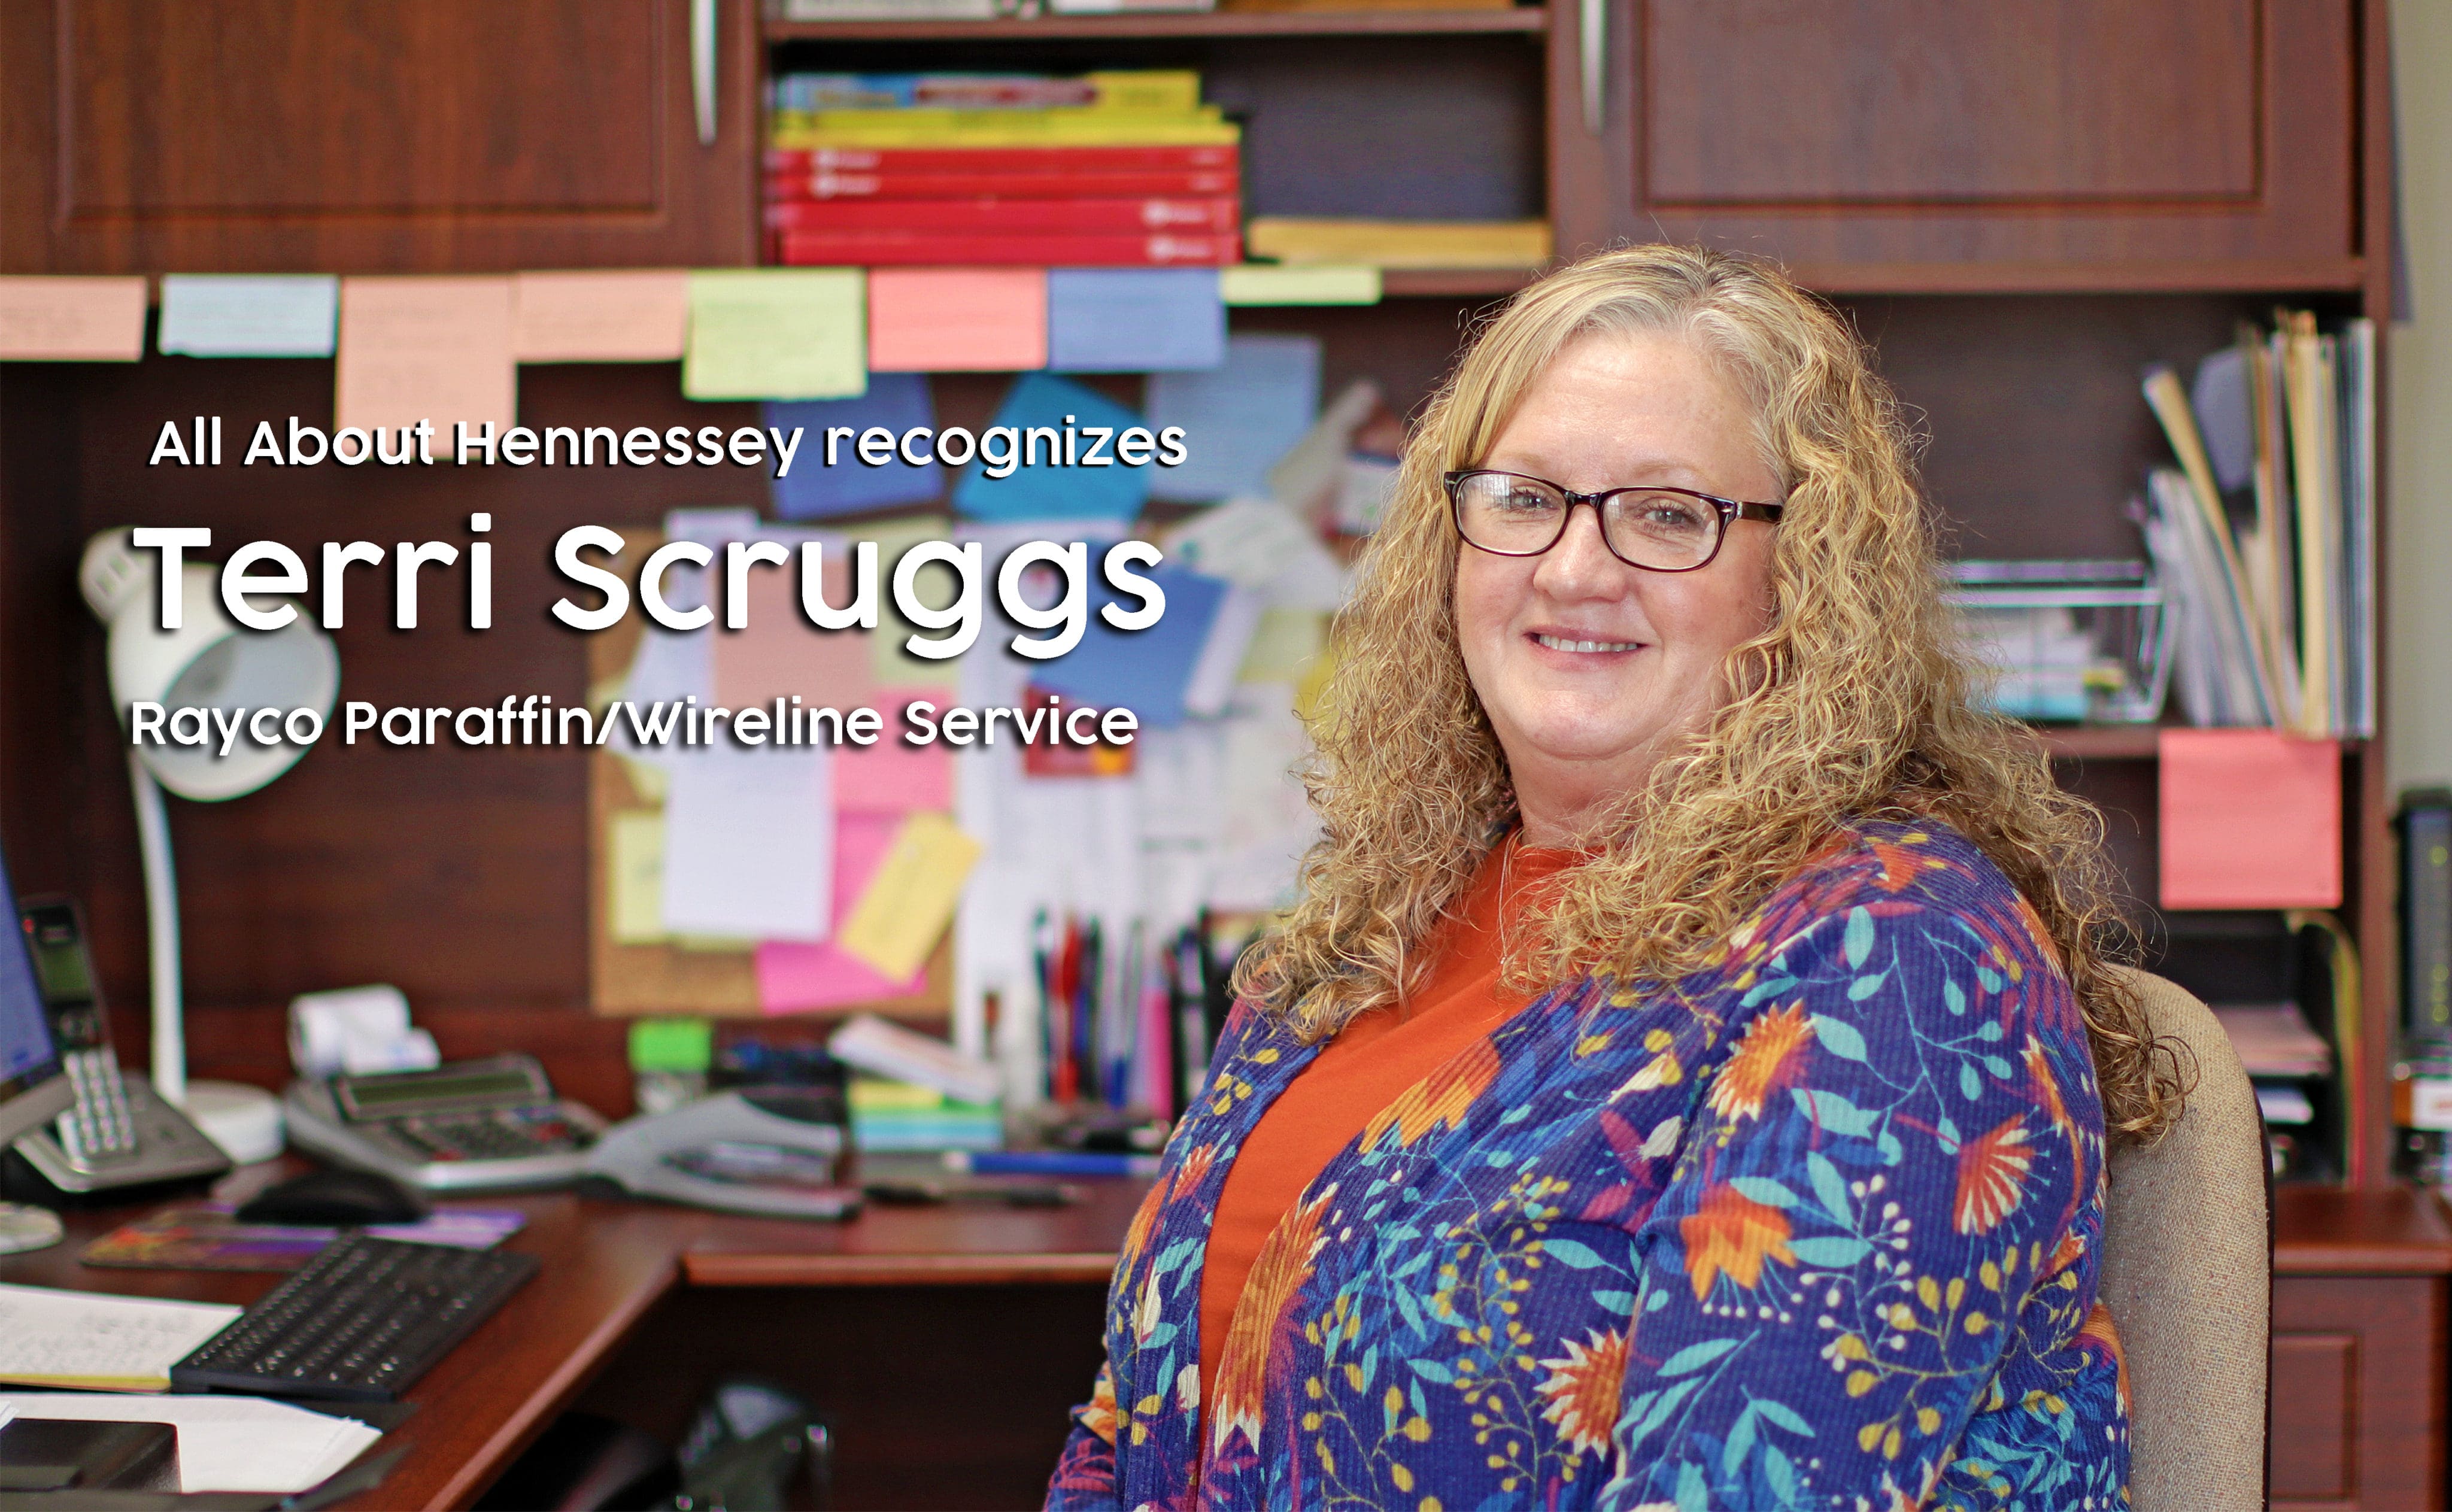 THIS WEEK ALL ABOUT HENNESSEY RECOGNIZES TERRI SCRUGGS – RAYCO PARAFFIN/WIRELINE SERVICE